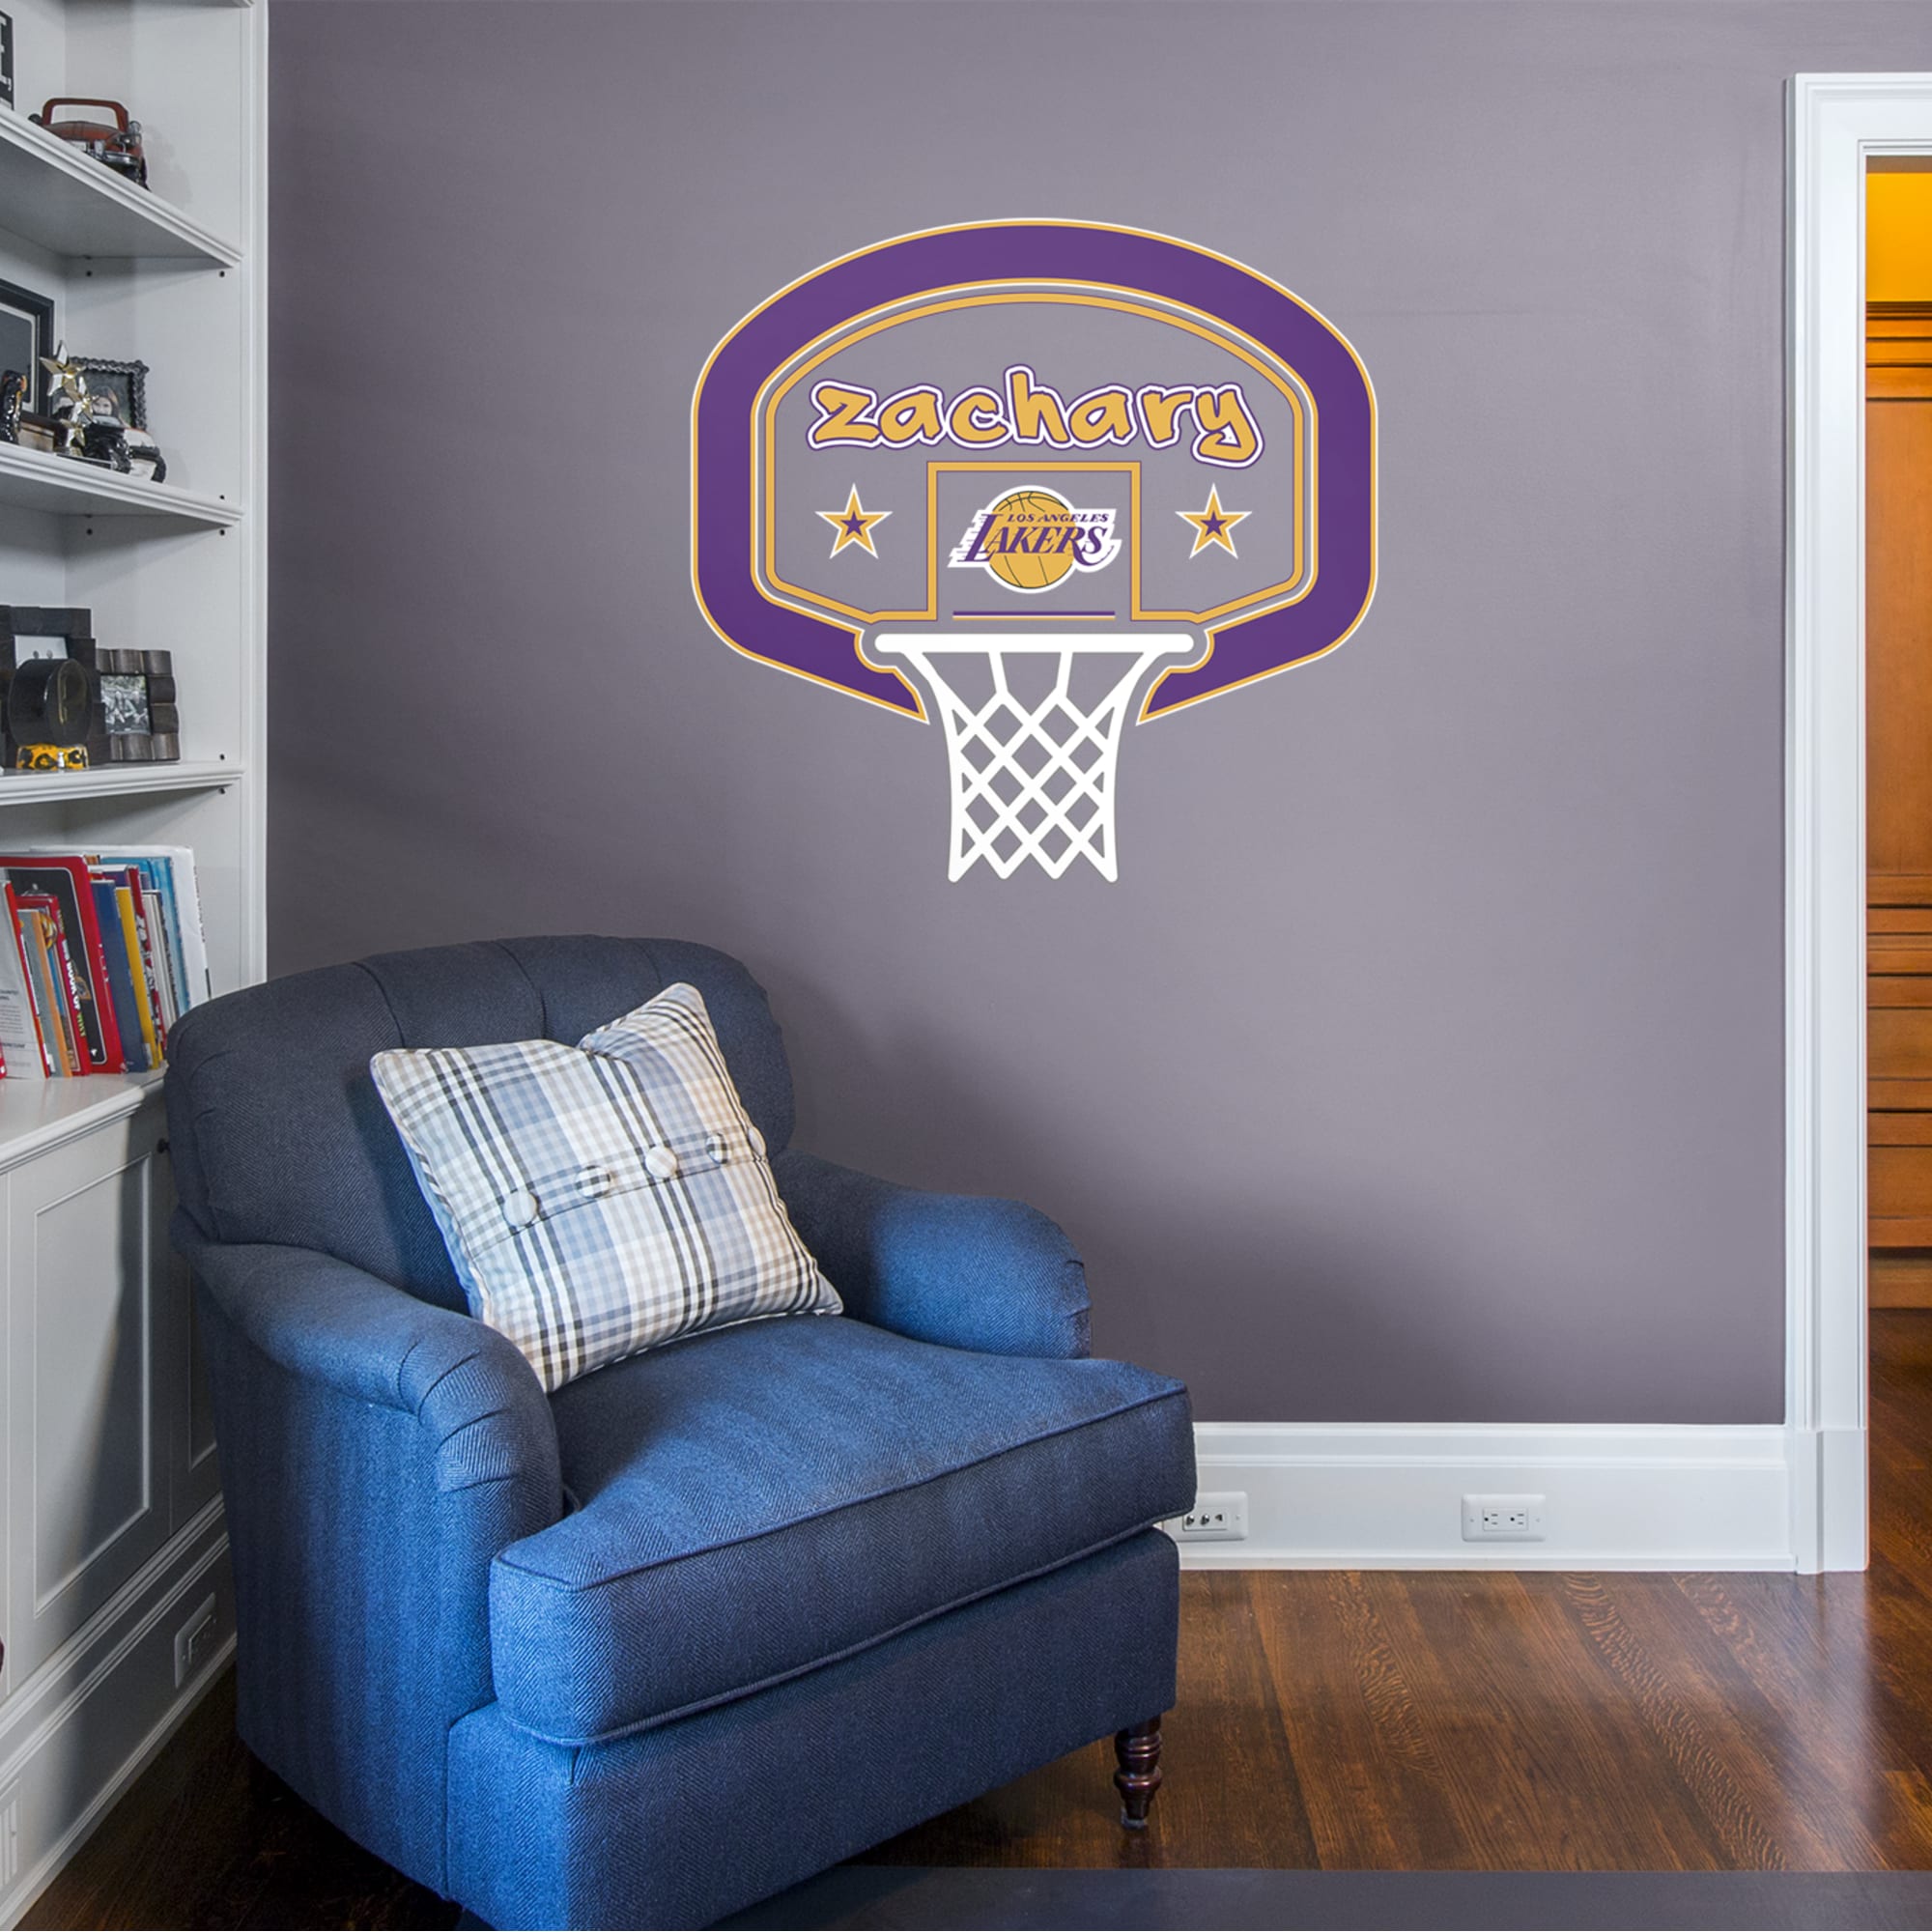 Los Angeles Lakers: Personalized Name - Officially Licensed NBA Transfer Decal 52.0"W x 39.5"H by Fathead | Vinyl